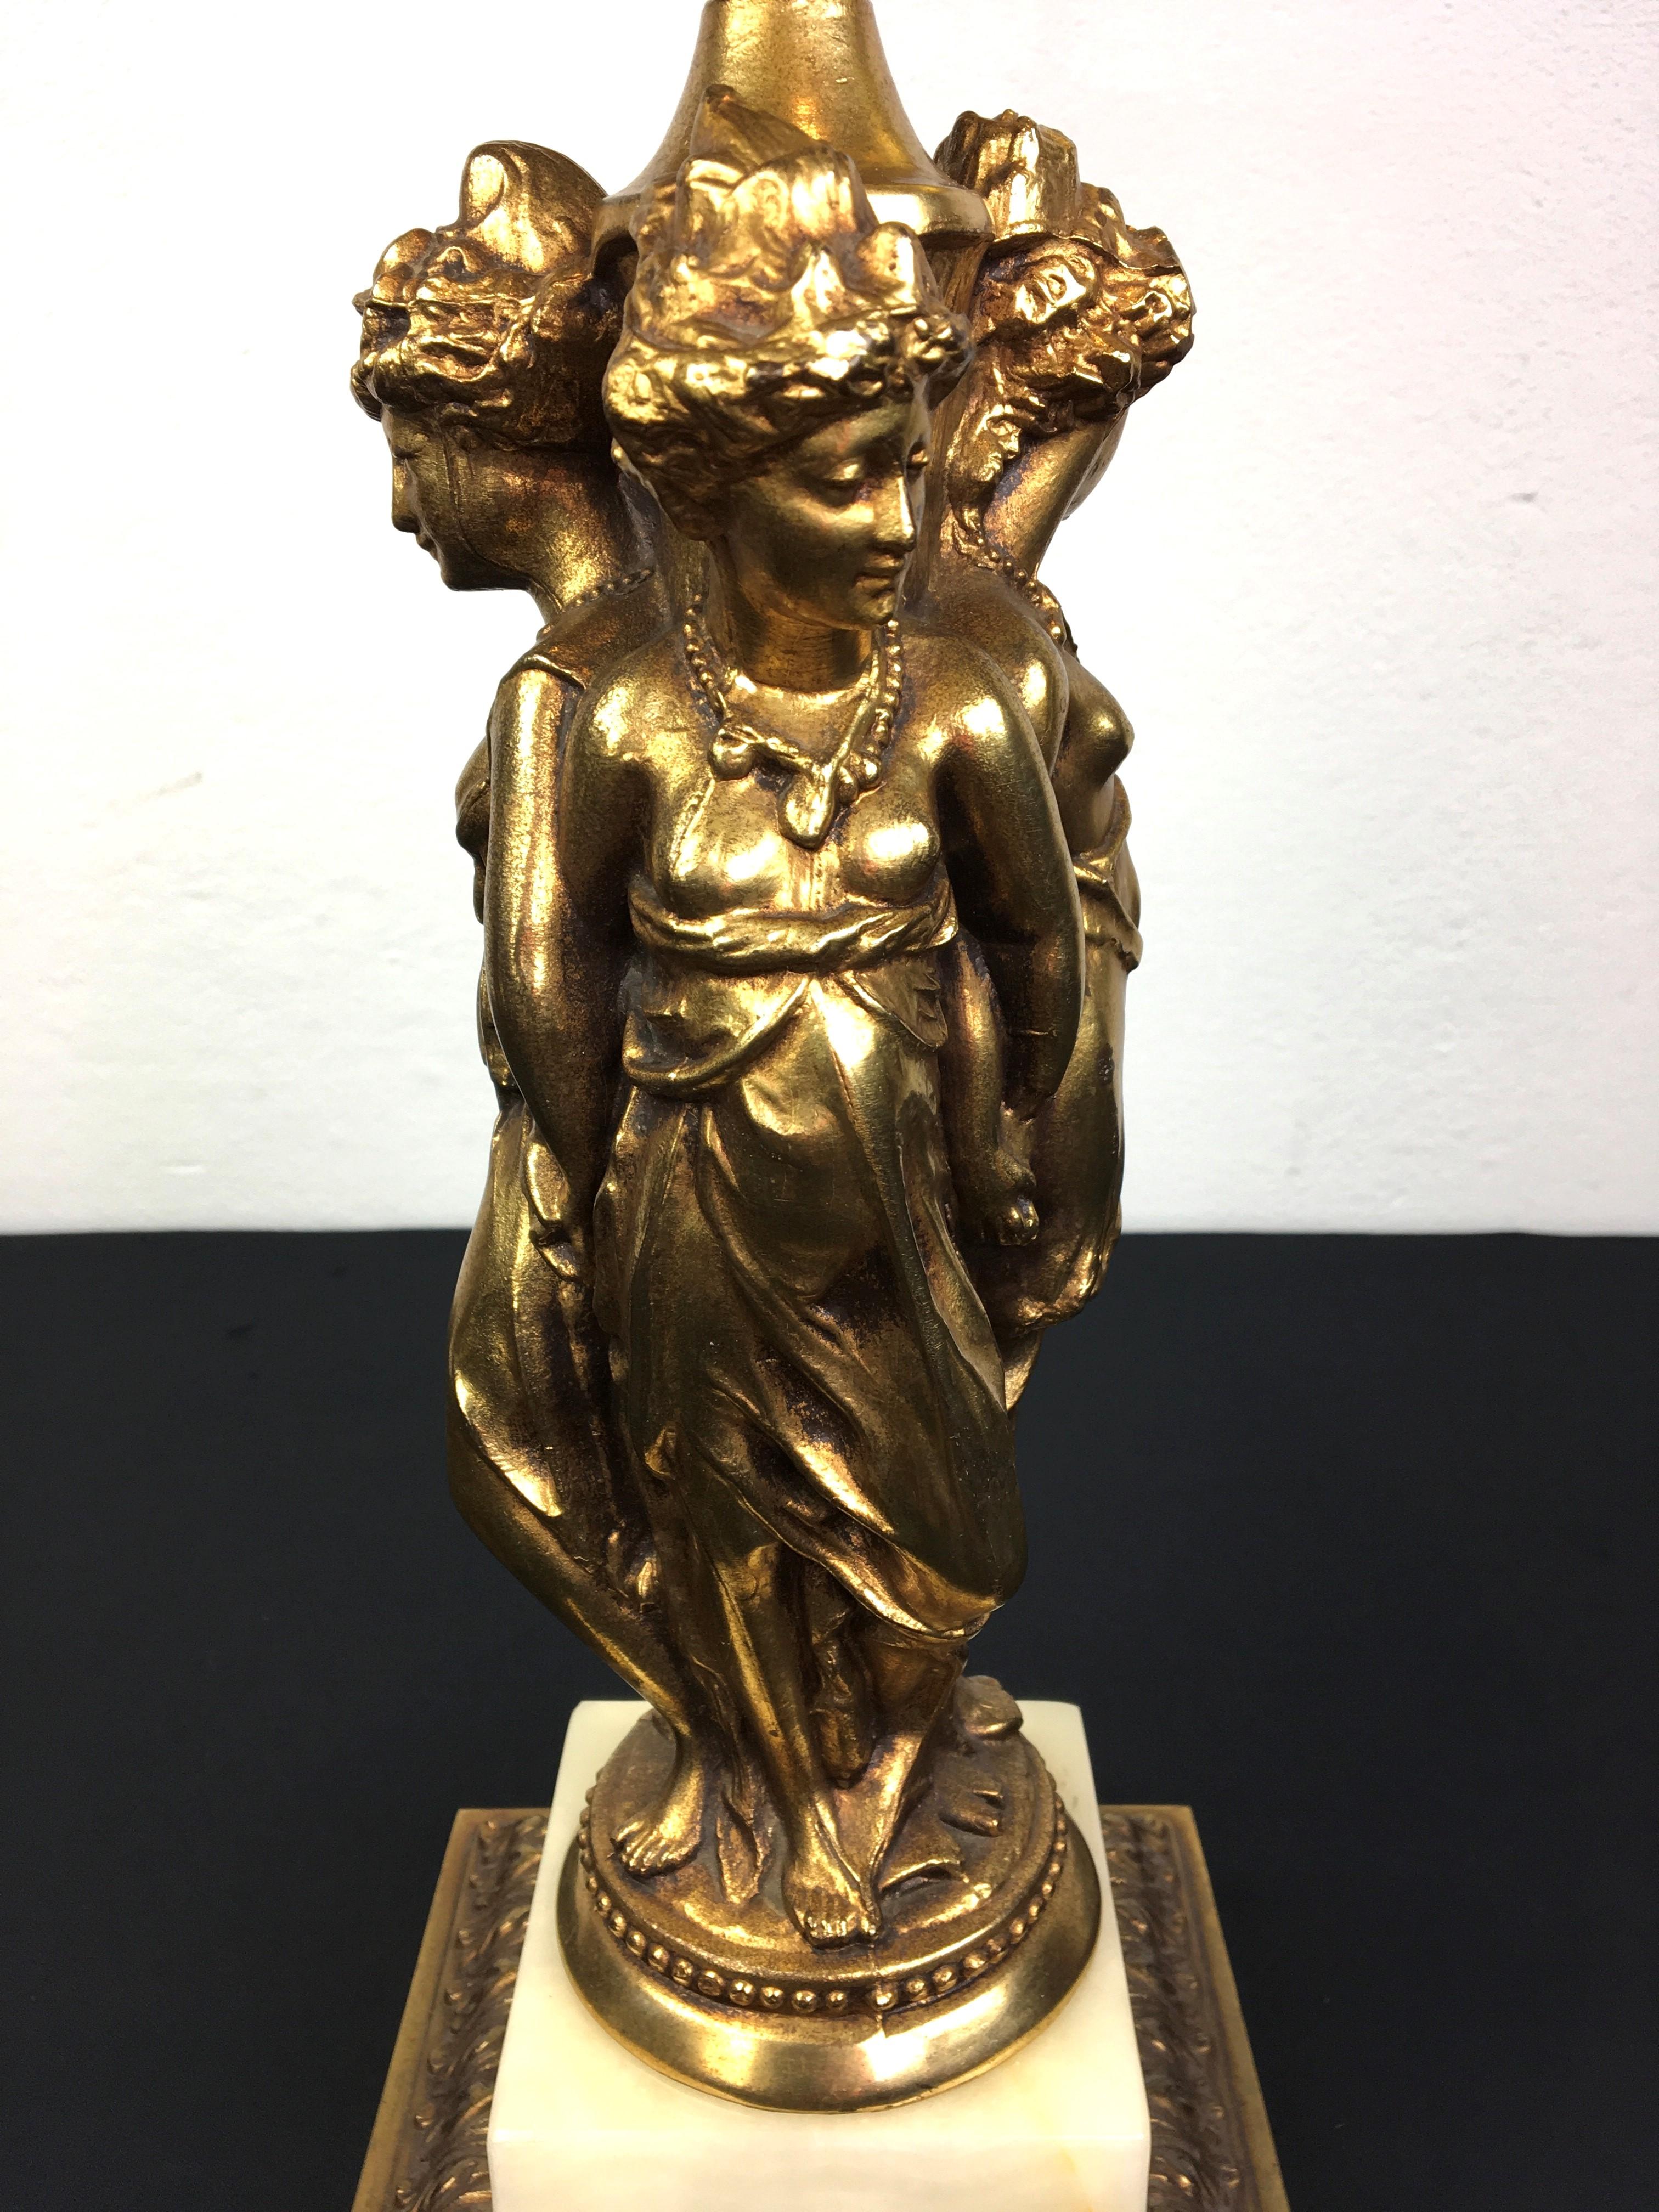 Hollywood Regency Deknudt table Lamp with an elegant trio of goddesses or ladies. This iconic godess lamp is an example of great monumental design from the 70’s. Made by the Belgian High Quality Lighting Company, Deknudt Lustrerie.

It' a stylish